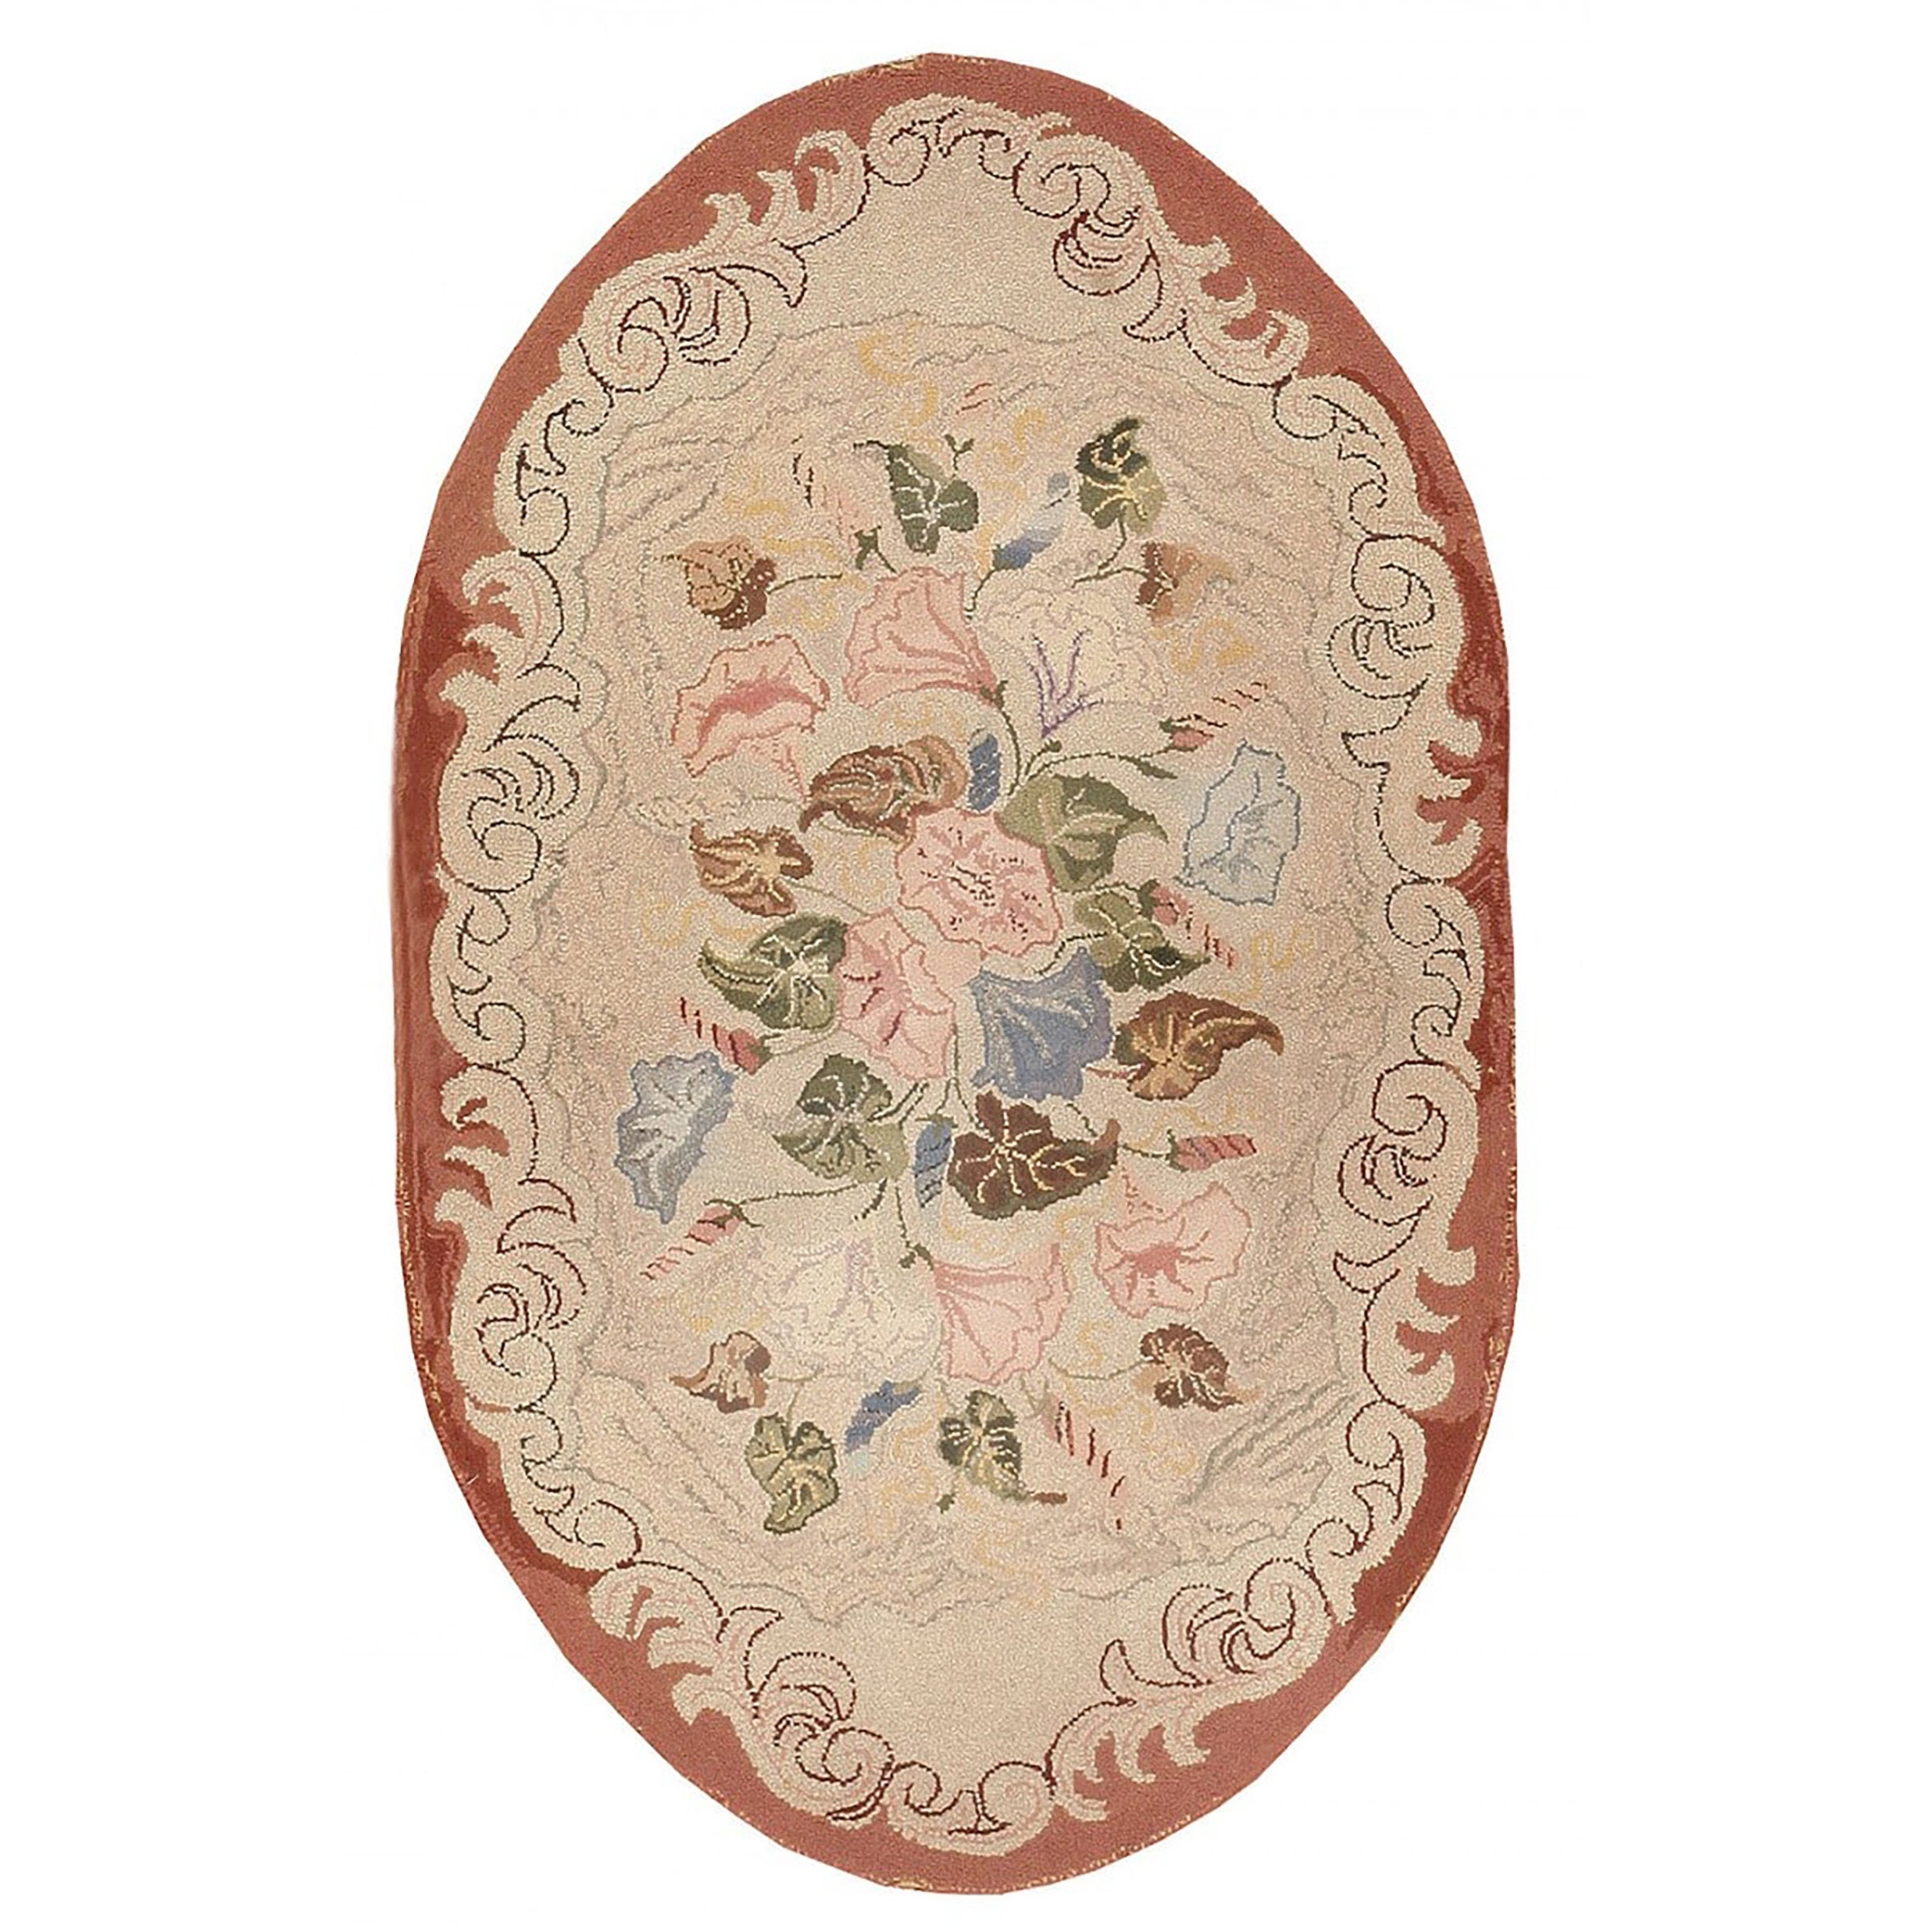 Small Oval Shaped Floral Design Antique American Hooked Rug 2'6" x 4' For Sale